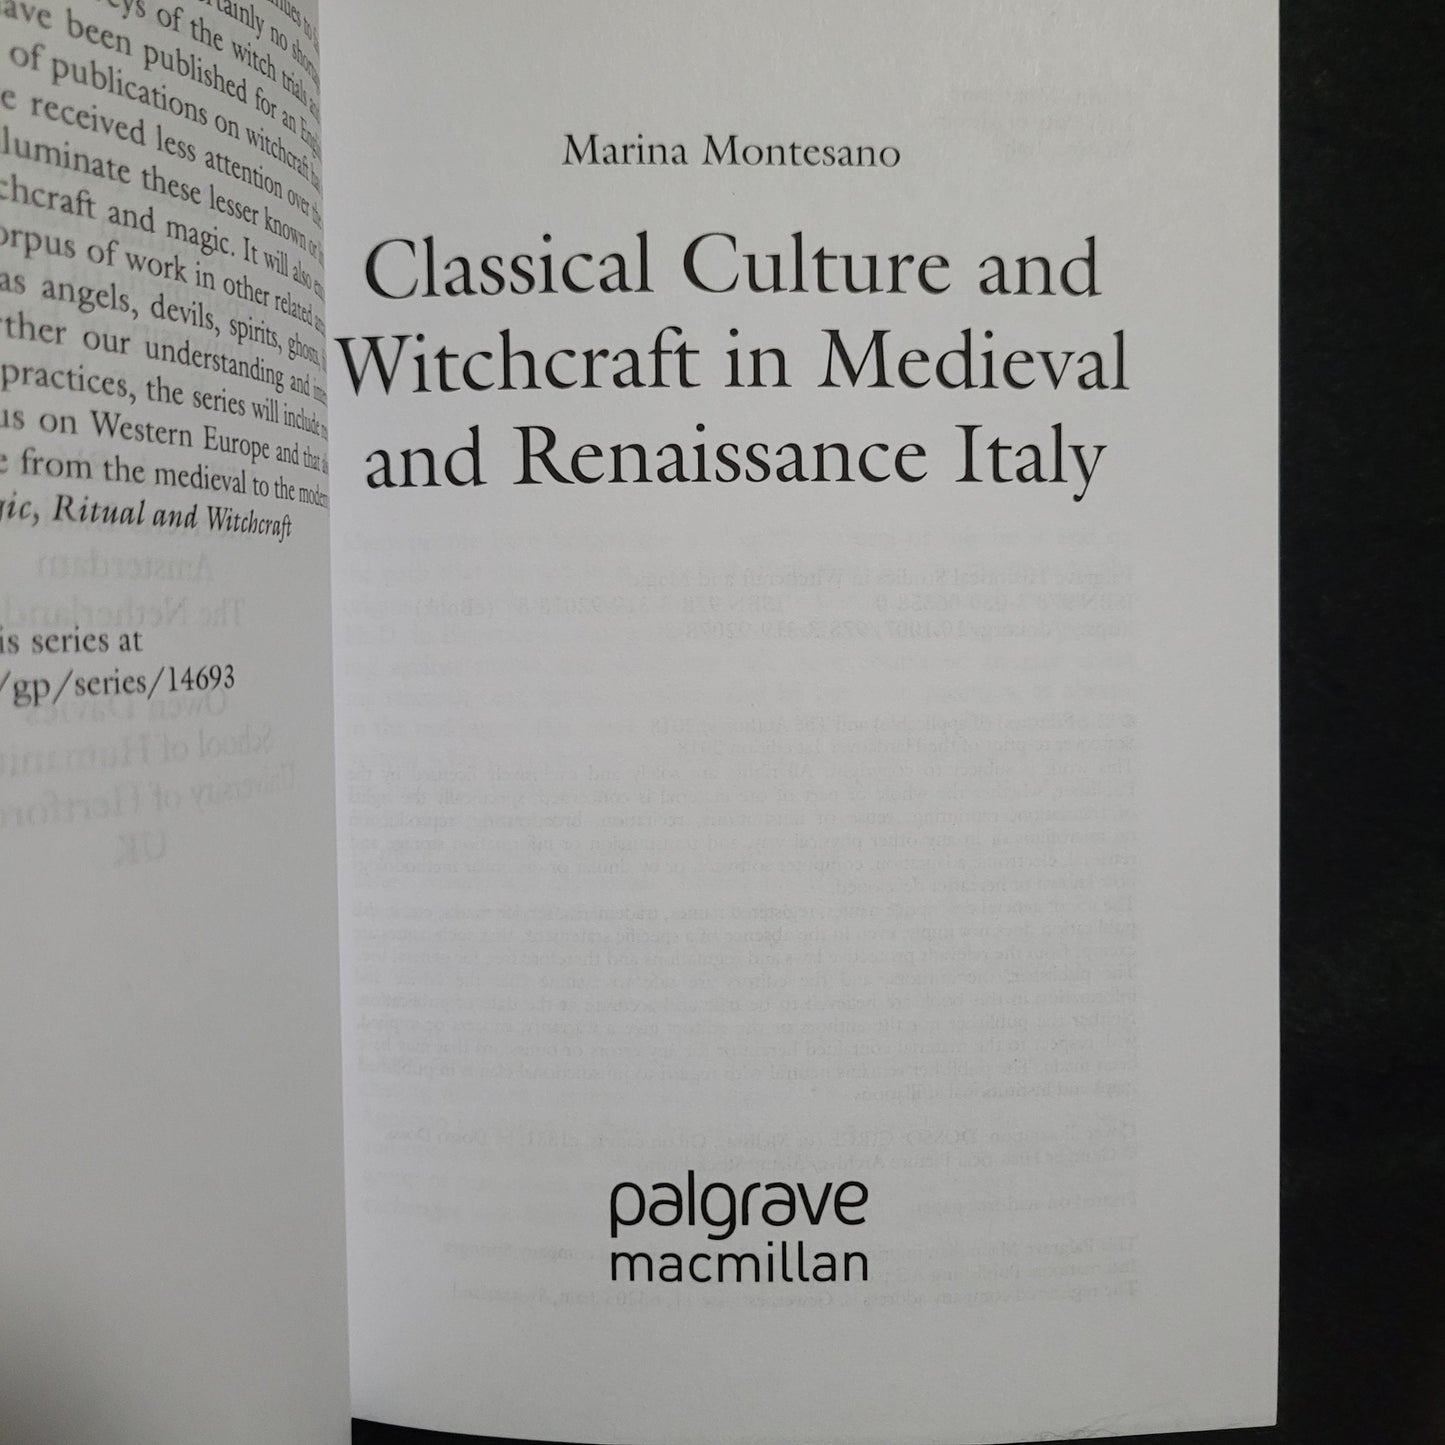 Classical Culture and Witchcraft in Medieval and Renaissance Italy, Palgrave Historical Studies in Witchcraft and Magic by Marina Montesano (Palgrave Macmillan, 2018) Paperback Edition